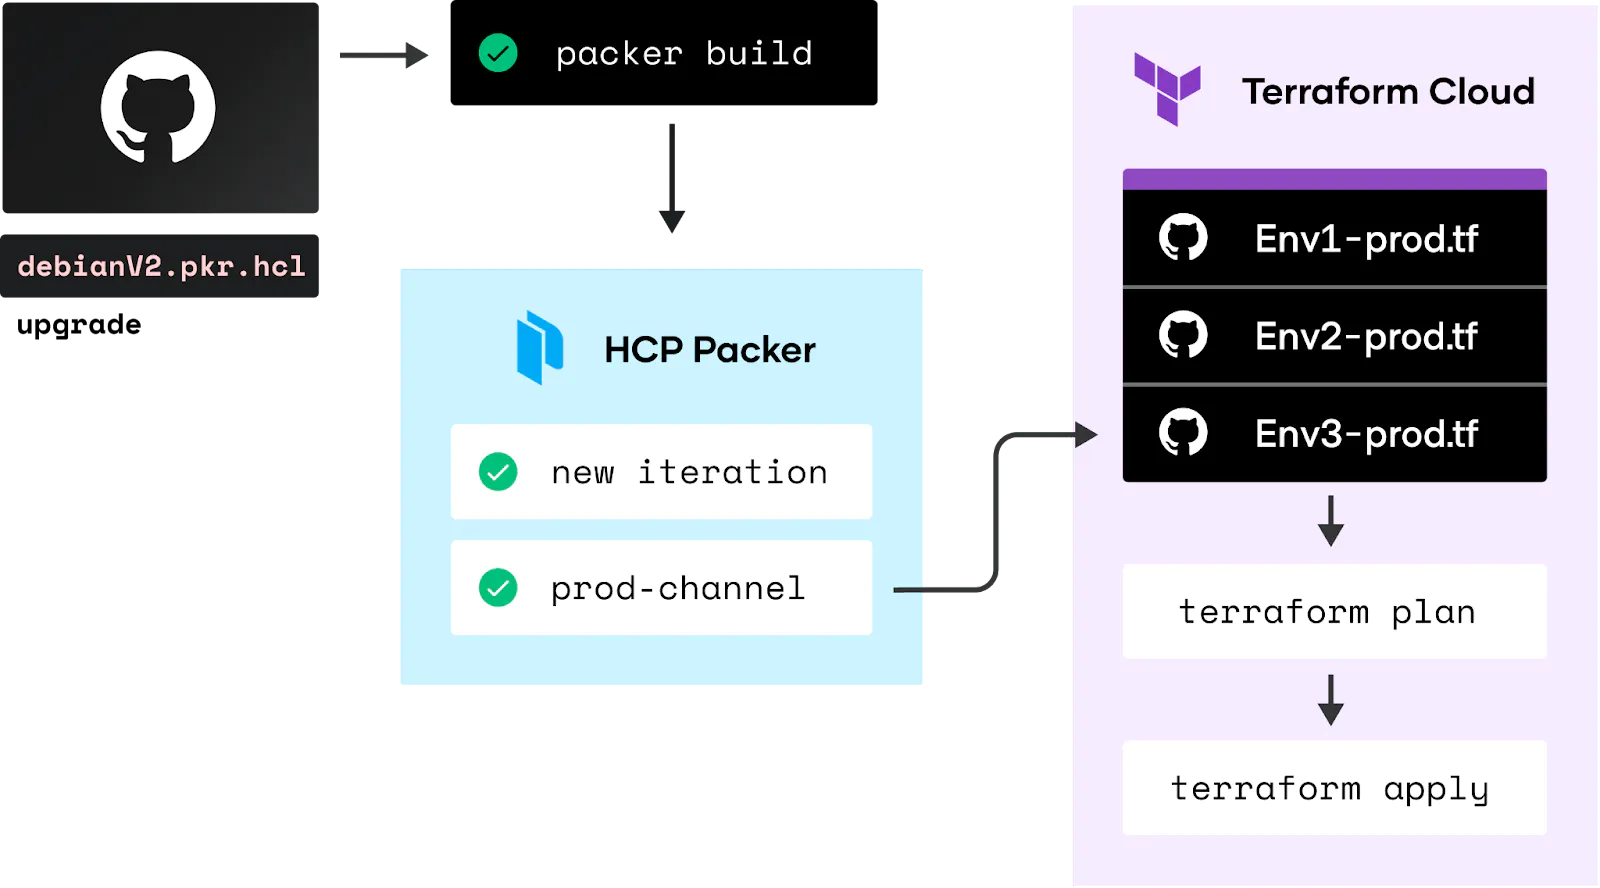 Reference HCP Packer in your Terraform Cloud workflows.